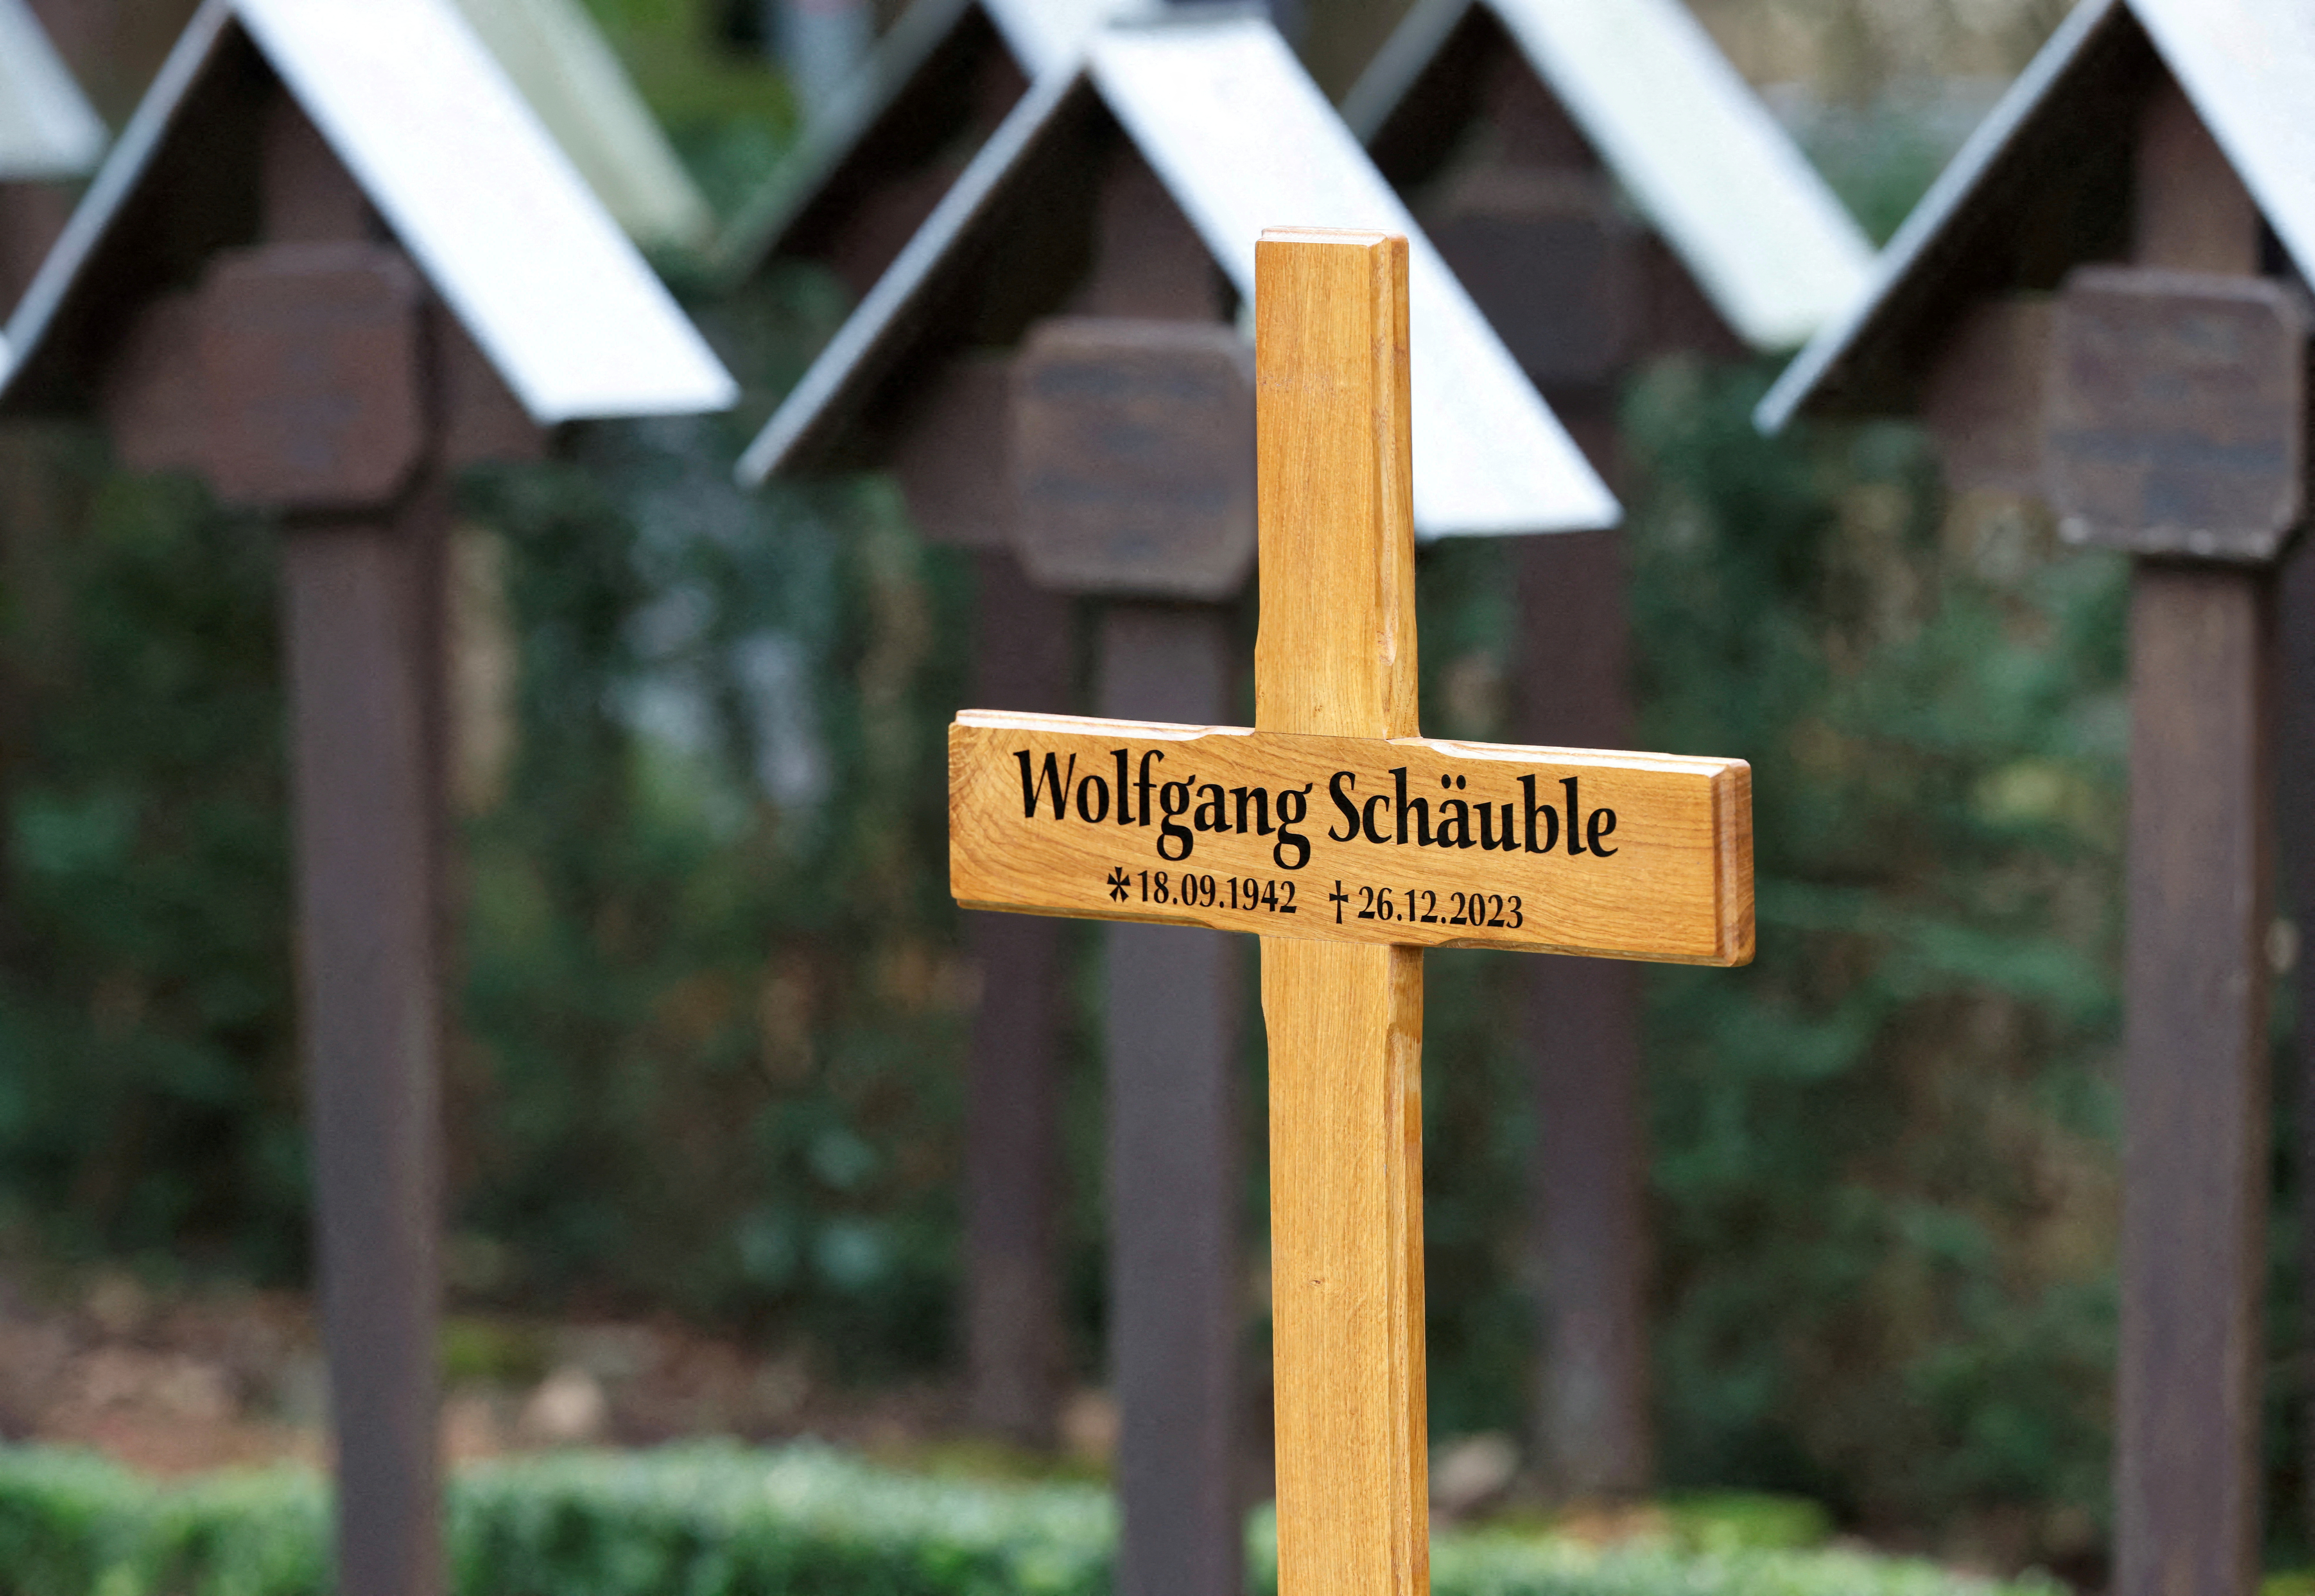 Former German Finance Minister Schaeuble is laid to rest in Offenburg